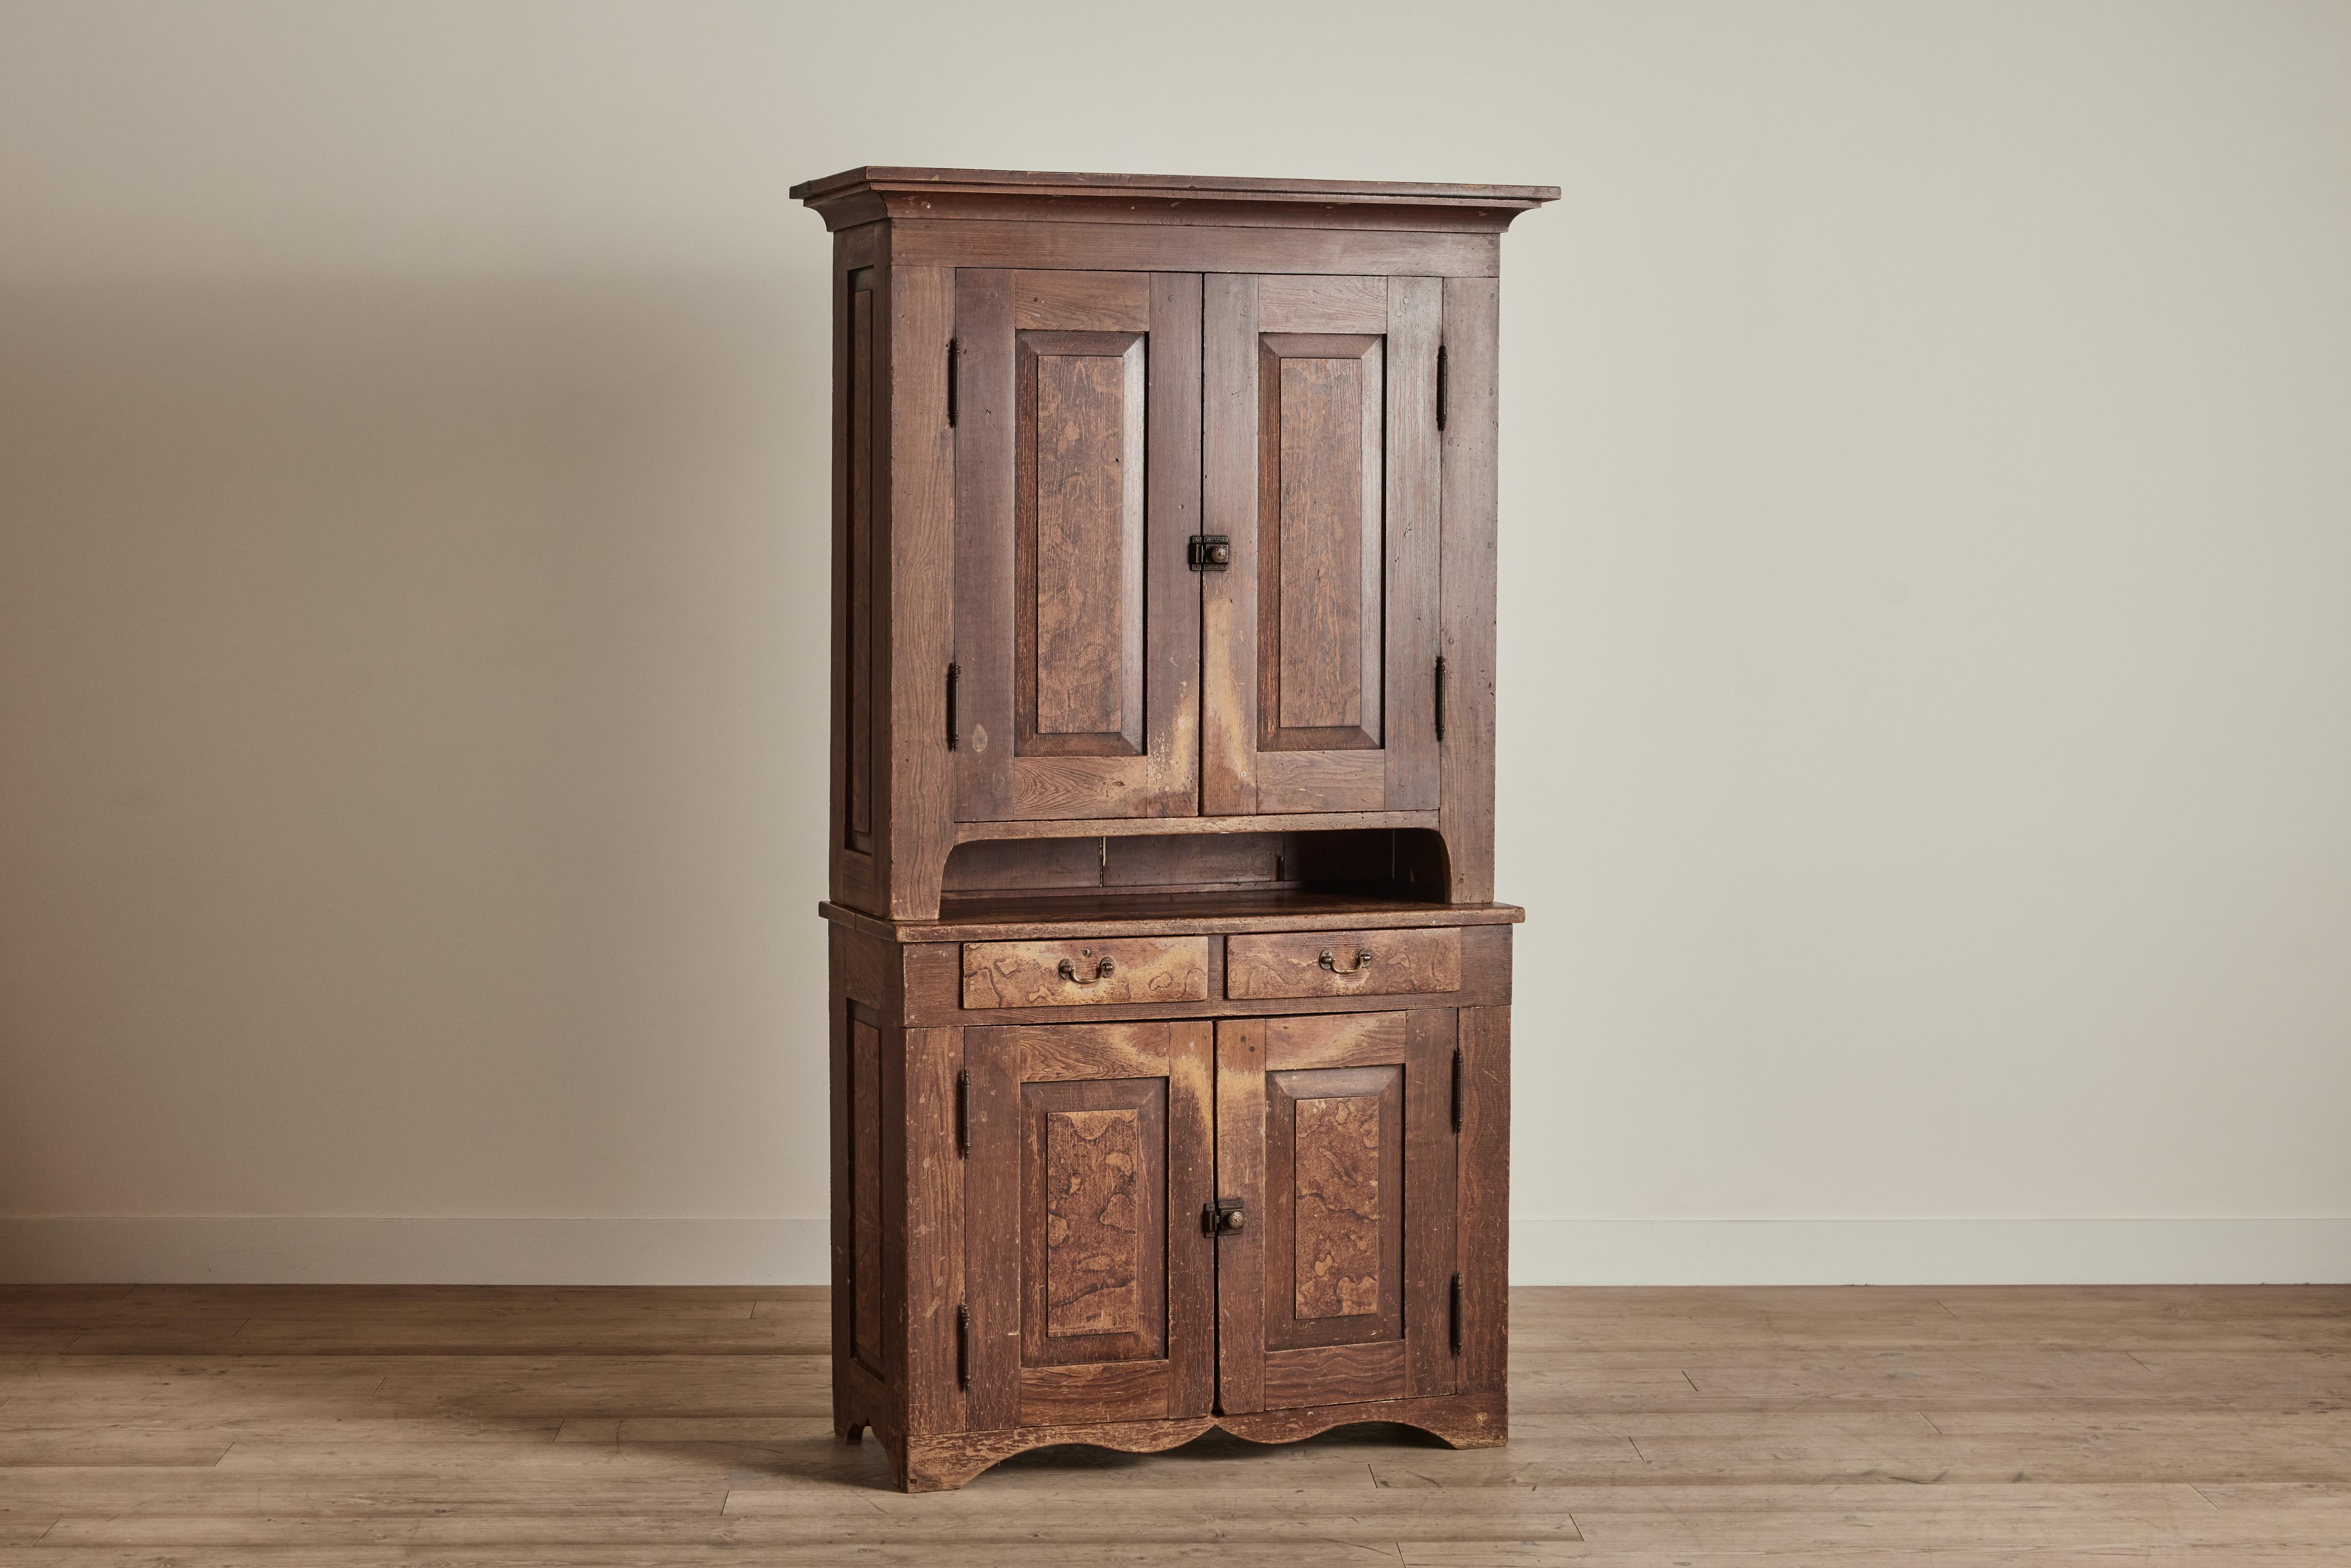 Tall nineteenth century step back cupboard with worn grain painted finish. This piece has a large upper compartment with shelving, two counter height drawer, and a lower compartment for generous storage. Cupboard has visible wear throughout that is